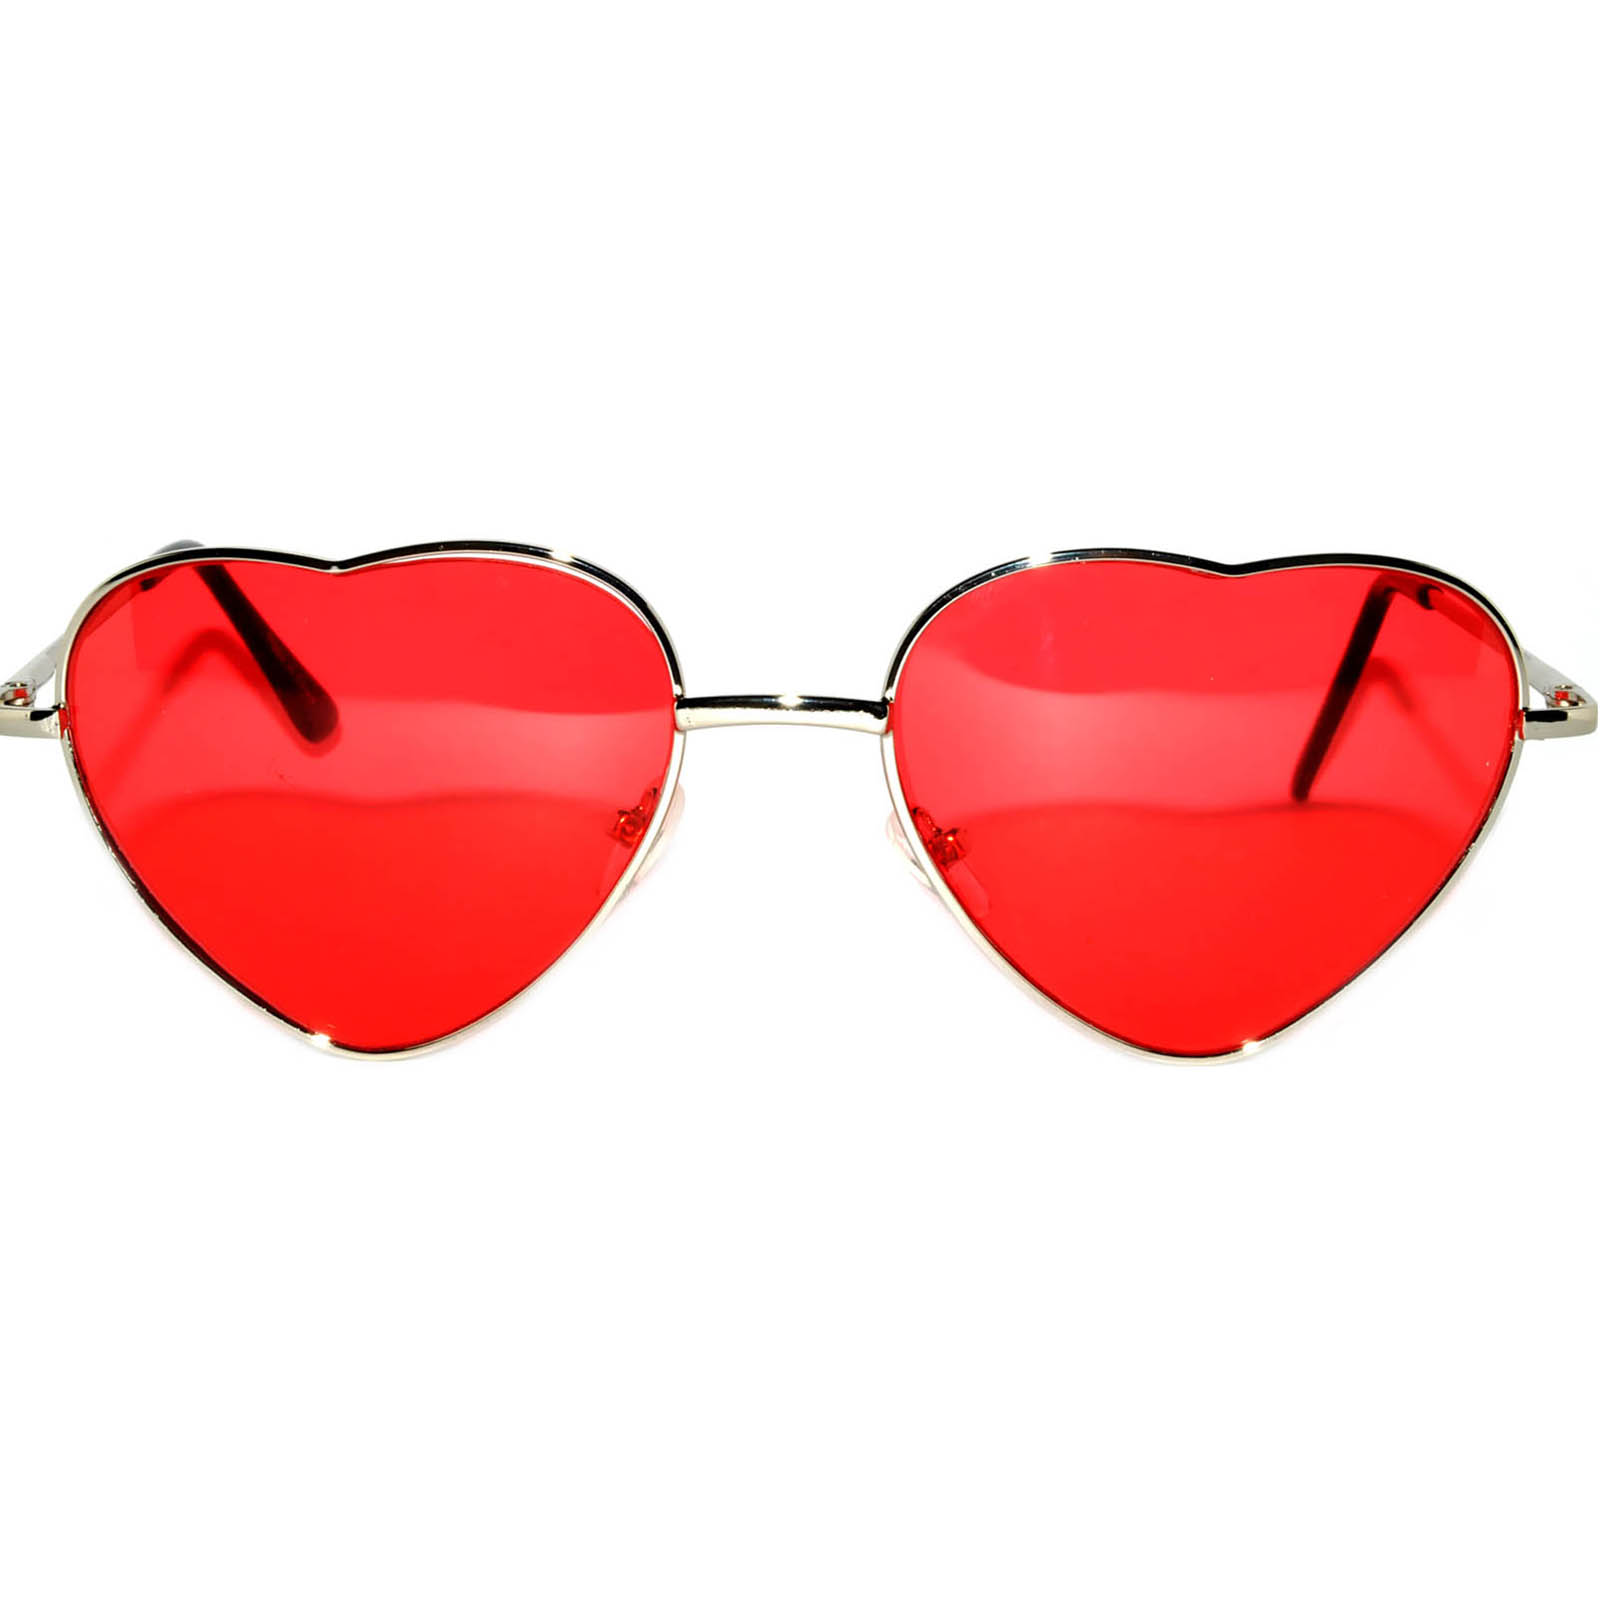 Red Heart shape sunglasses wholesale 12 pairs for men and women. 